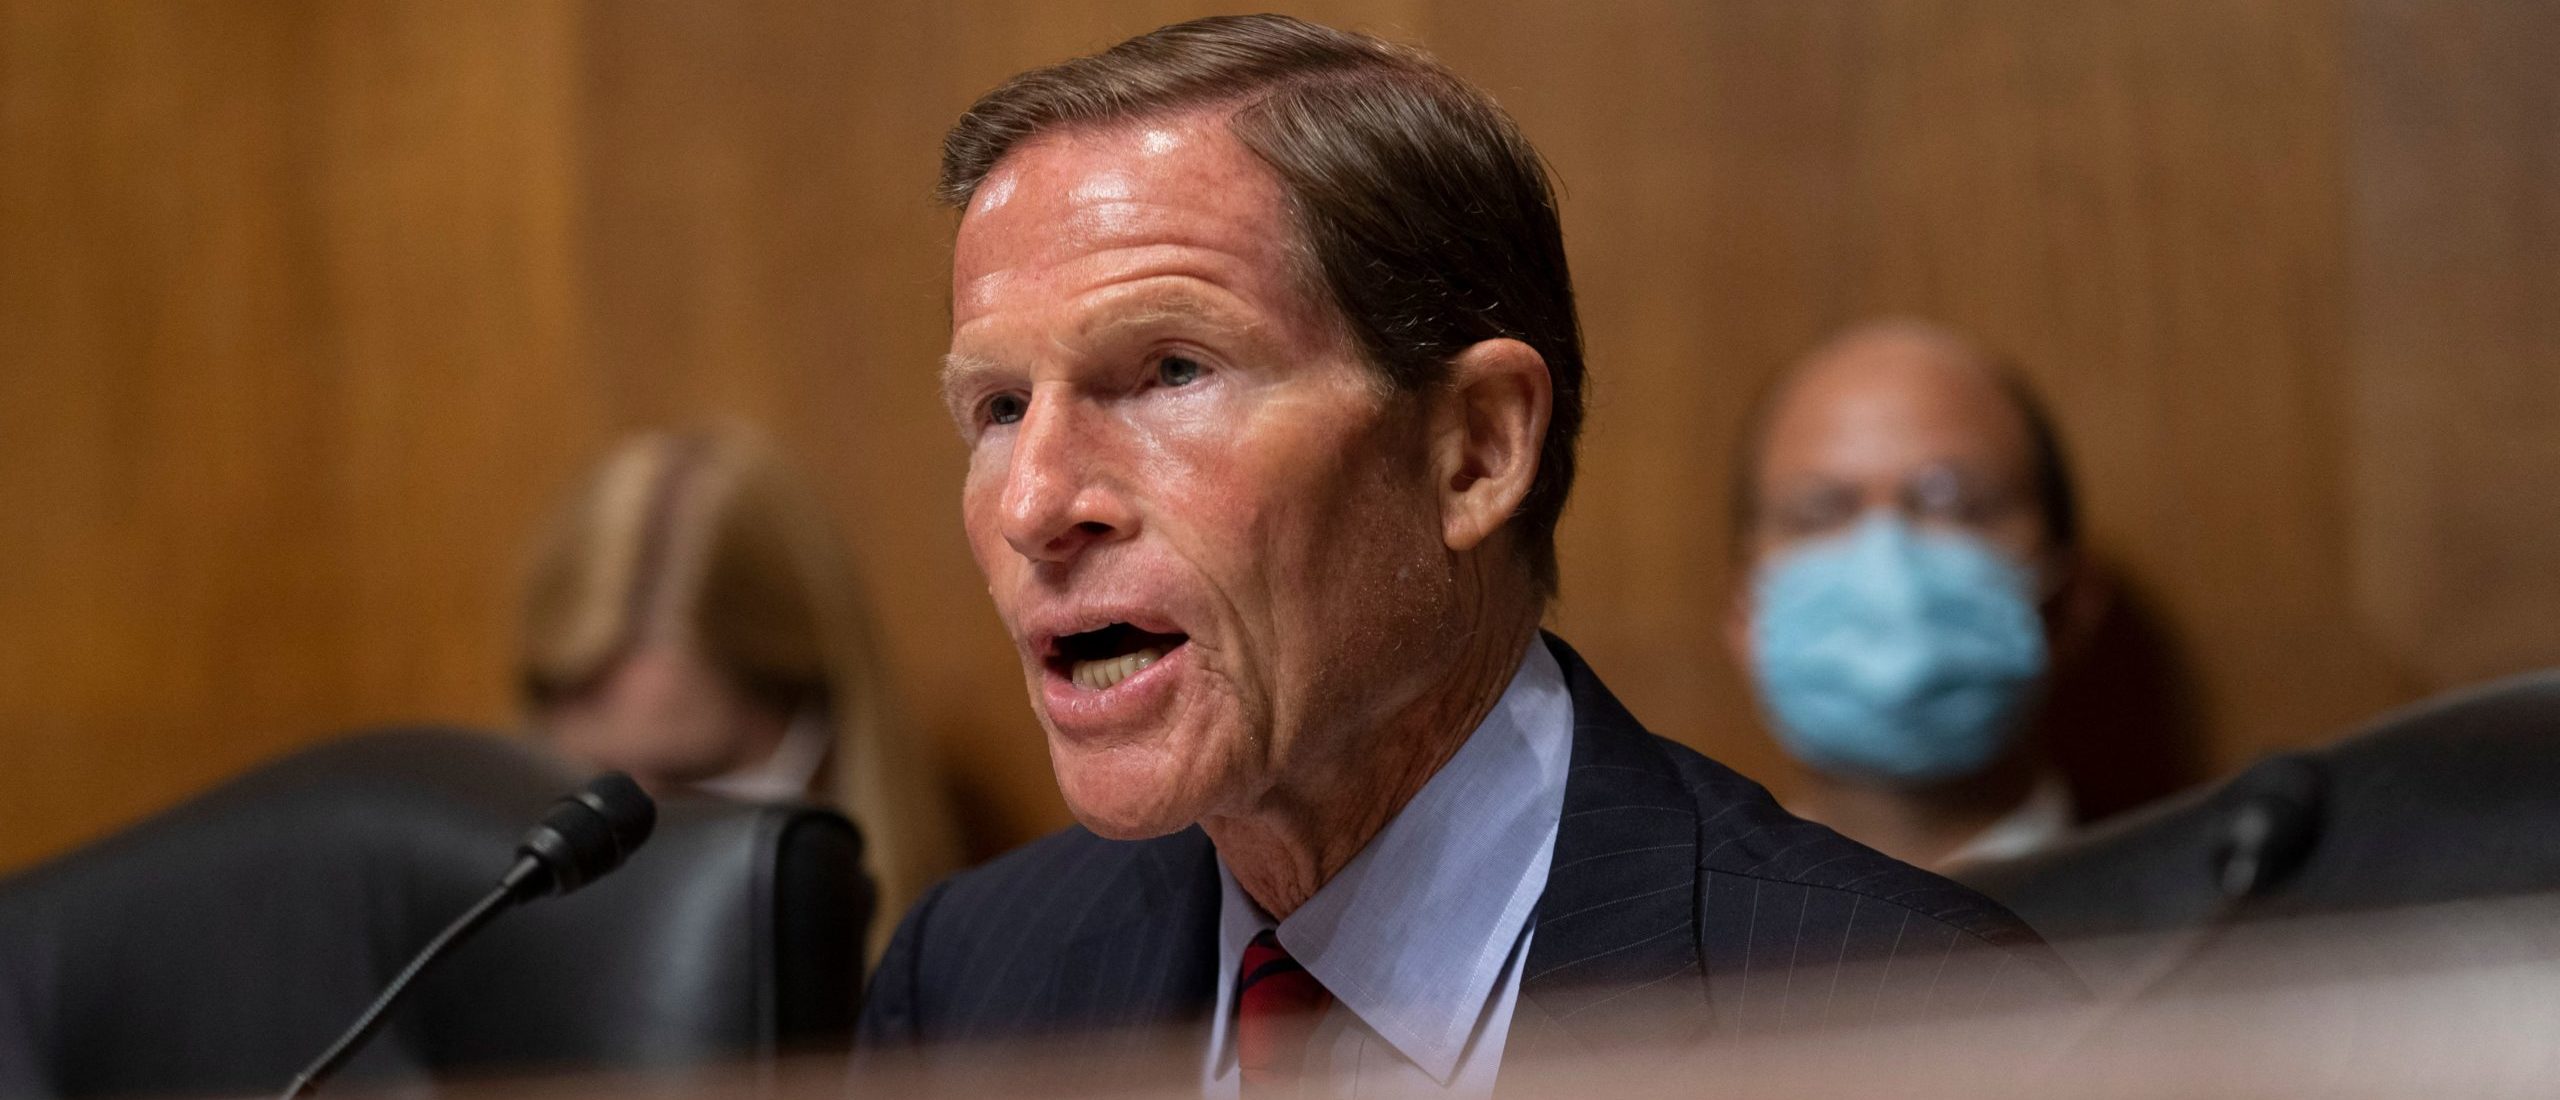 US Sen. Richard Blumenthal D-CT asks questions to witnesses as they testify before the Judiciary Subcommittee on Competition Policy, Antitrust, and Consumer Rights in a hearing to examine big data, focusing on implications for competition and consumers on Capitol Hill in Washington, DC on September 21, 2021. (Photo by KEN CEDENO/AFP via Getty Images)